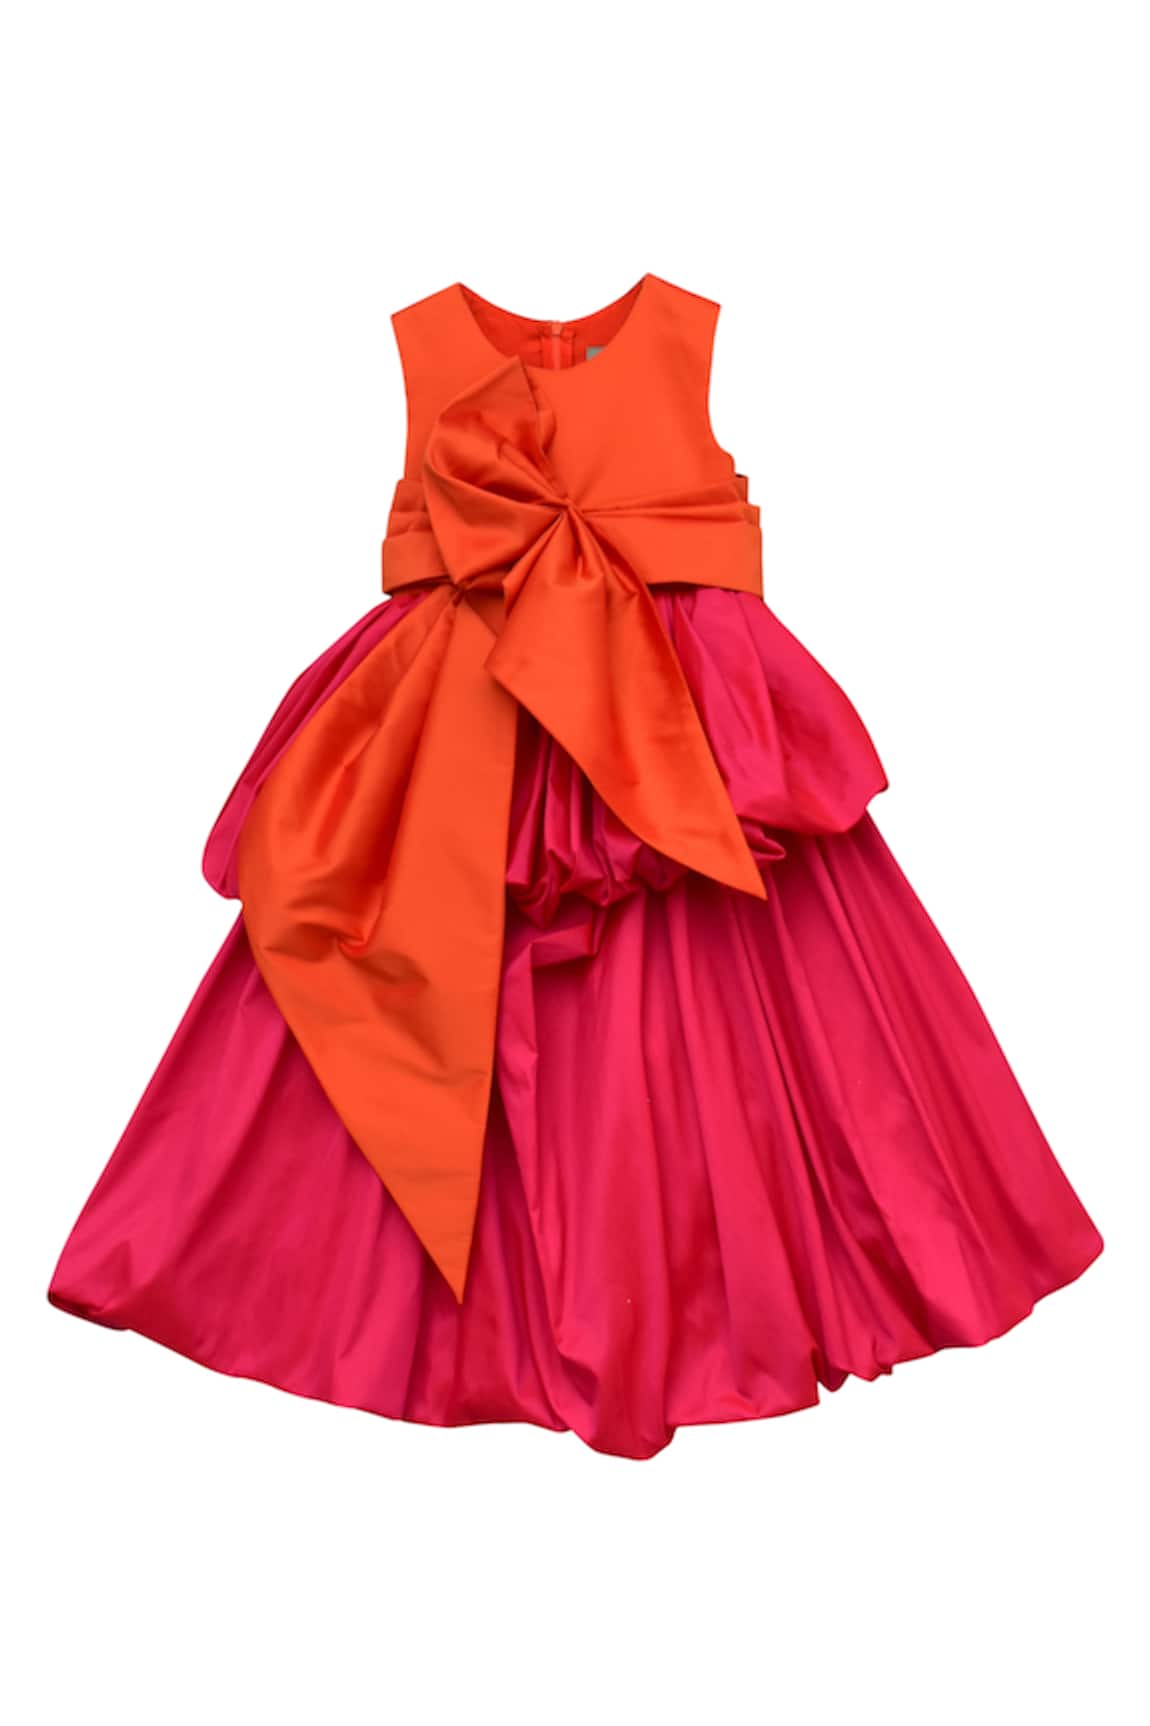 Indian Designer Dresses - PINK NET KIDS GIRL DESIGNER GOWN WITH FLORAL WORK  DTK2652 To browse more collection click below link  https://www.indiabazaaronline.com/kids-gown #kids #gown #kidsgown #girl # dress #frock #gownforgirl #fashion #kidswear |